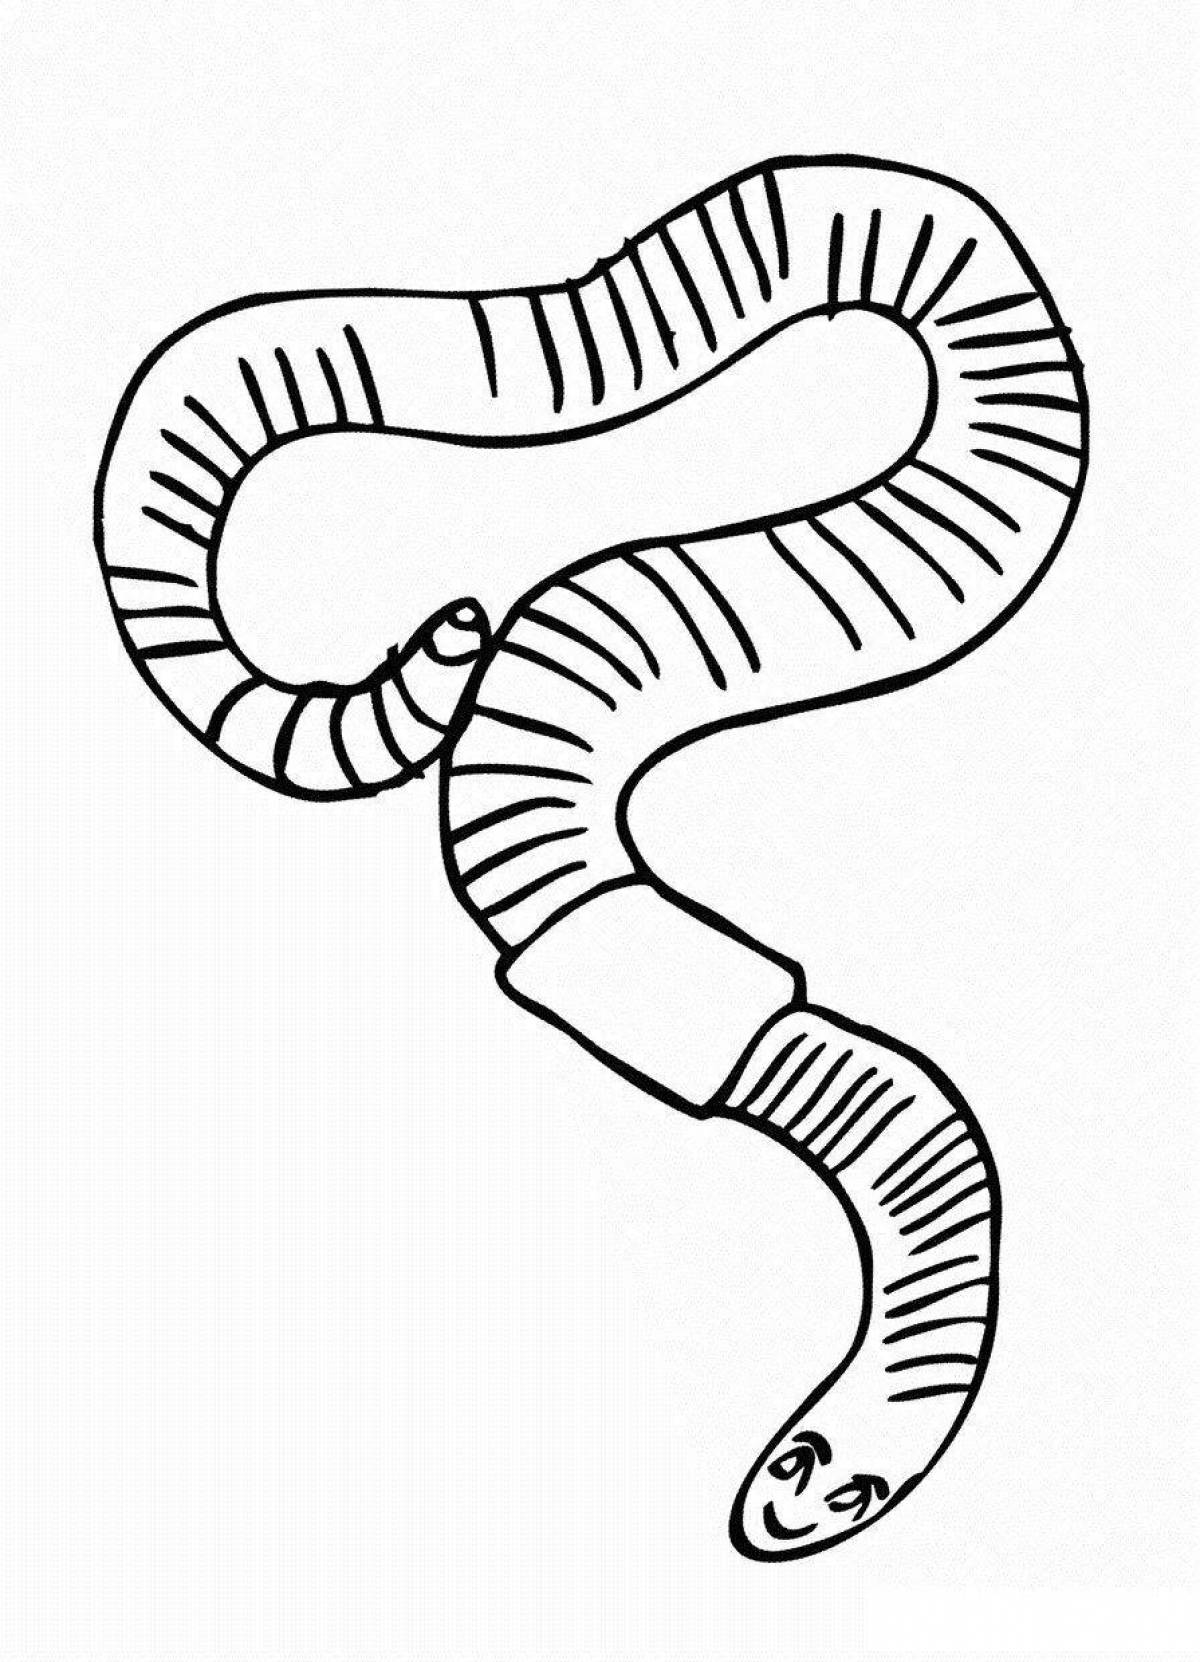 Adorable worm coloring page for kids